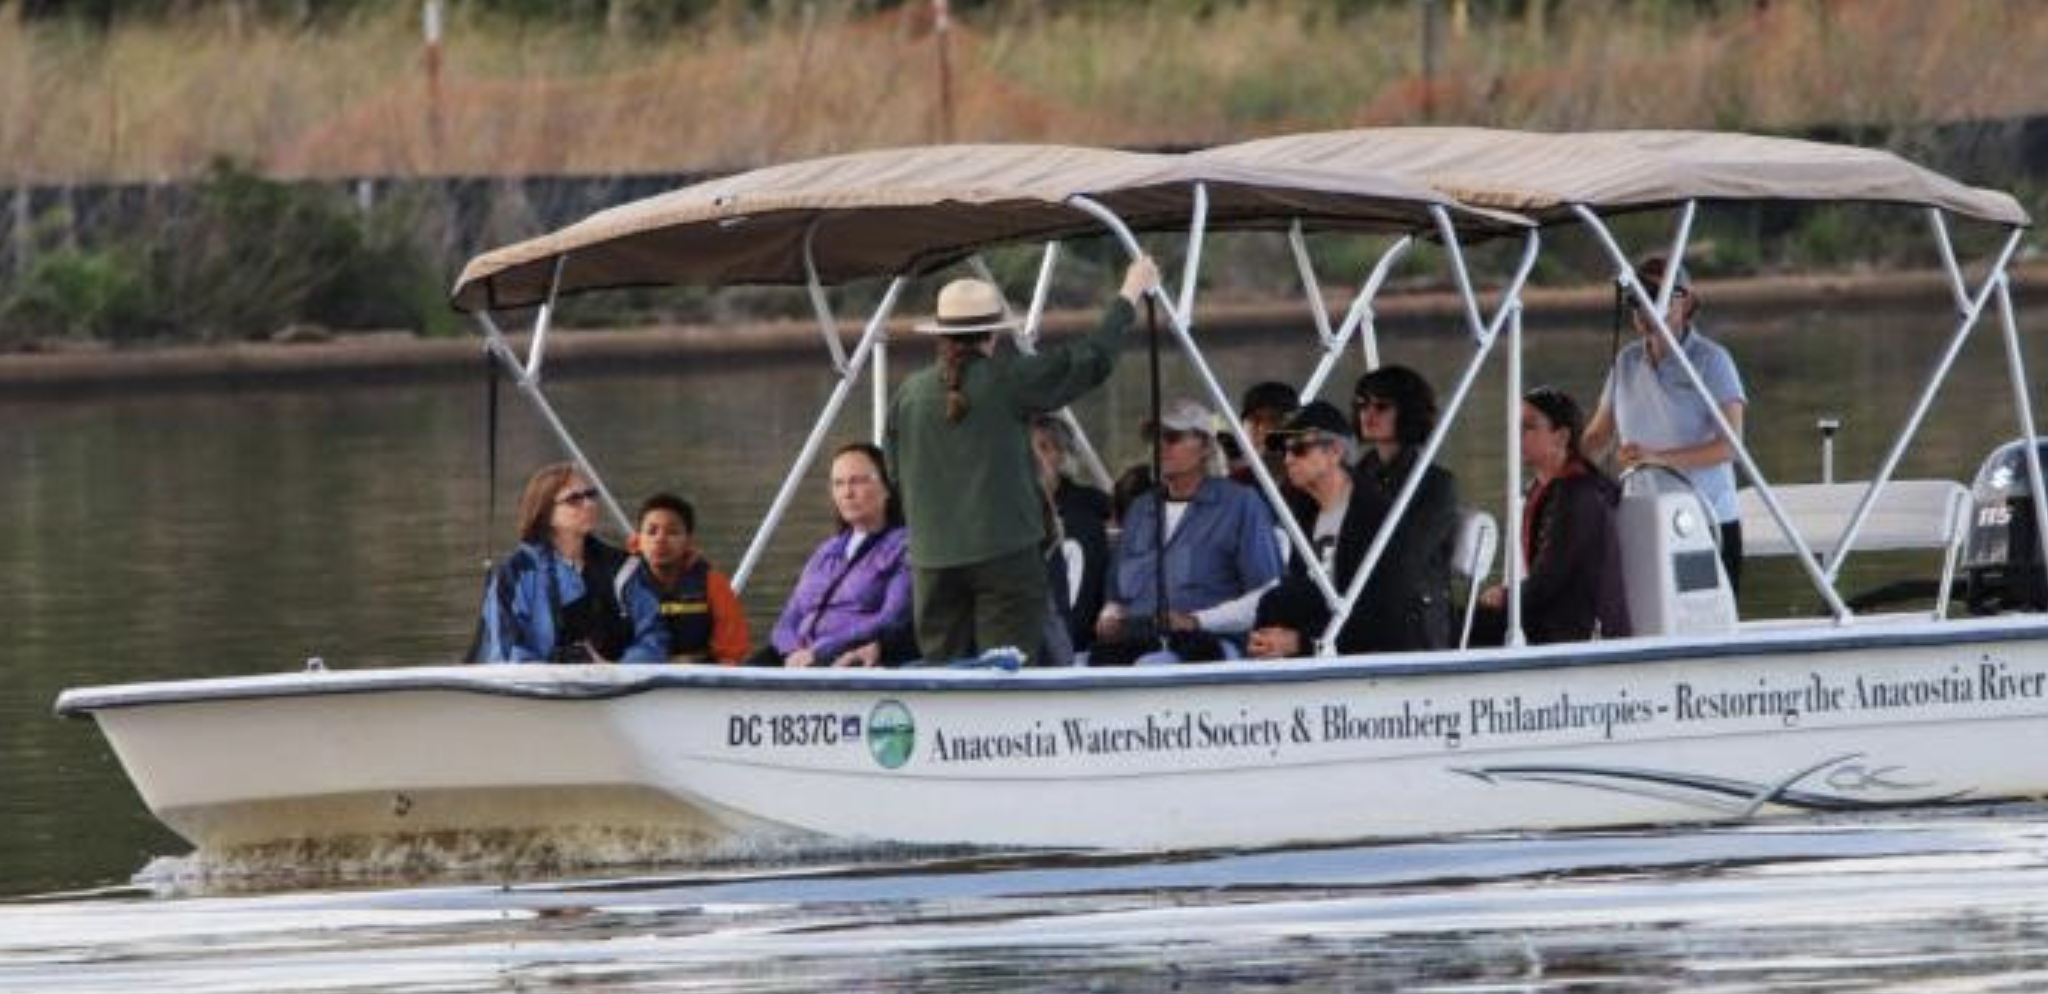 Anacostia Watershed Society Boat Tour